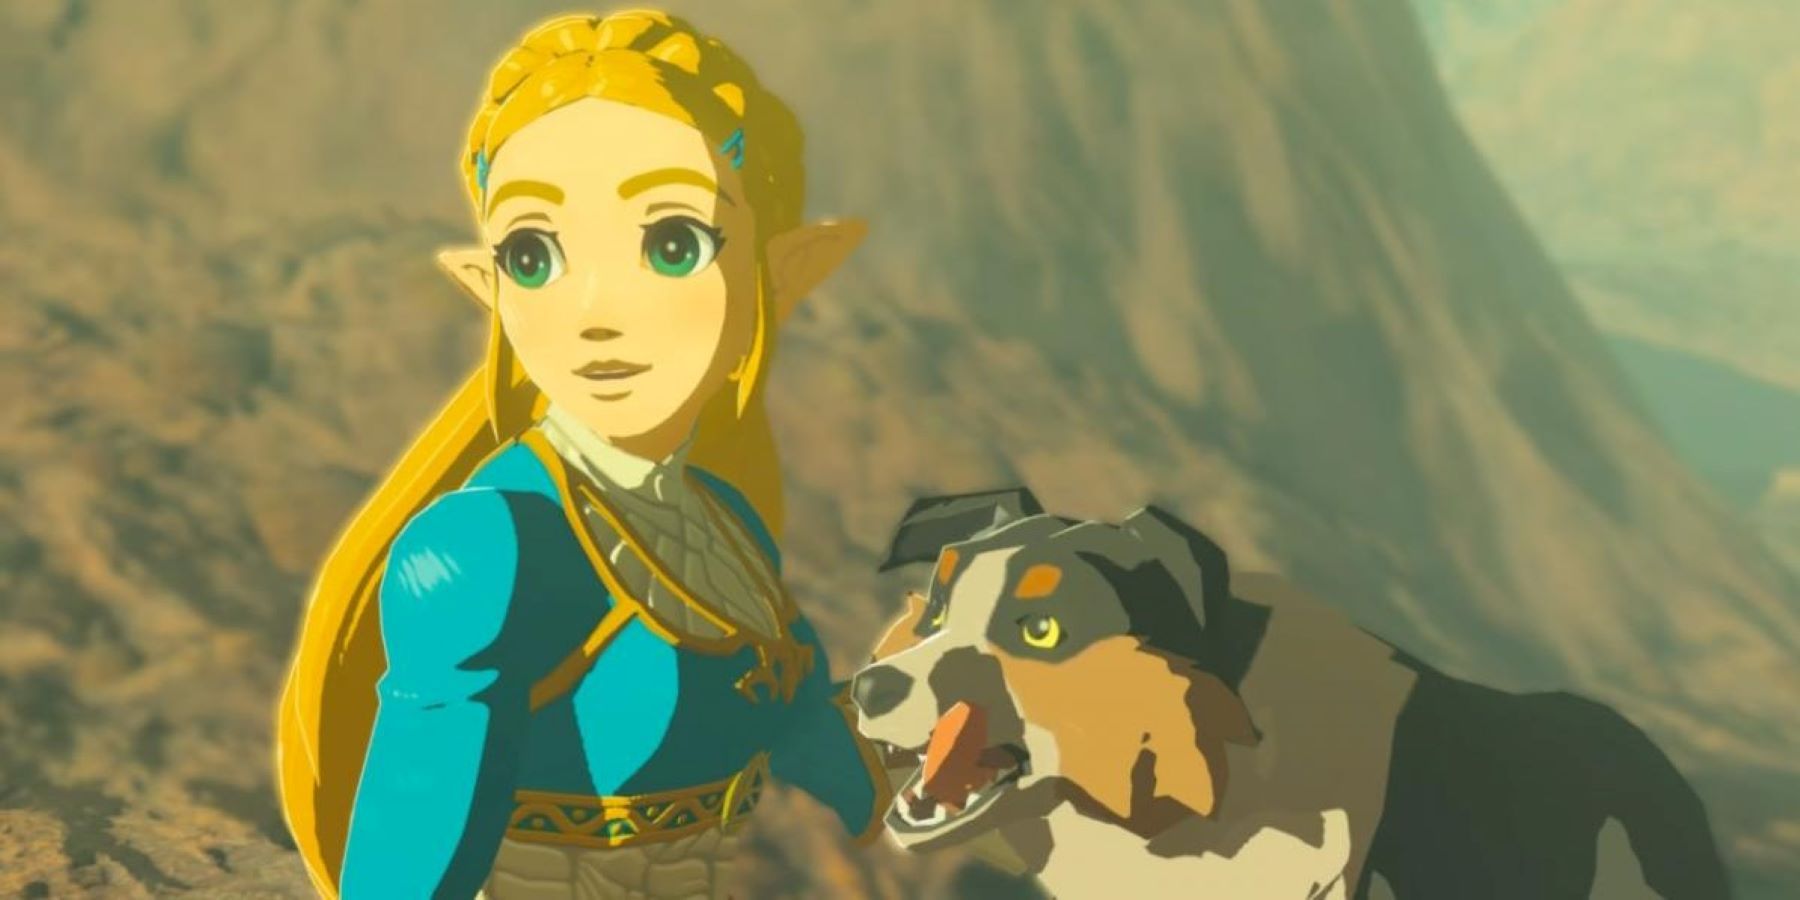 Princess Zelda smiling and sitting next to a dog licking its chops in The Legend of Zelda: Breath of the Wild 2